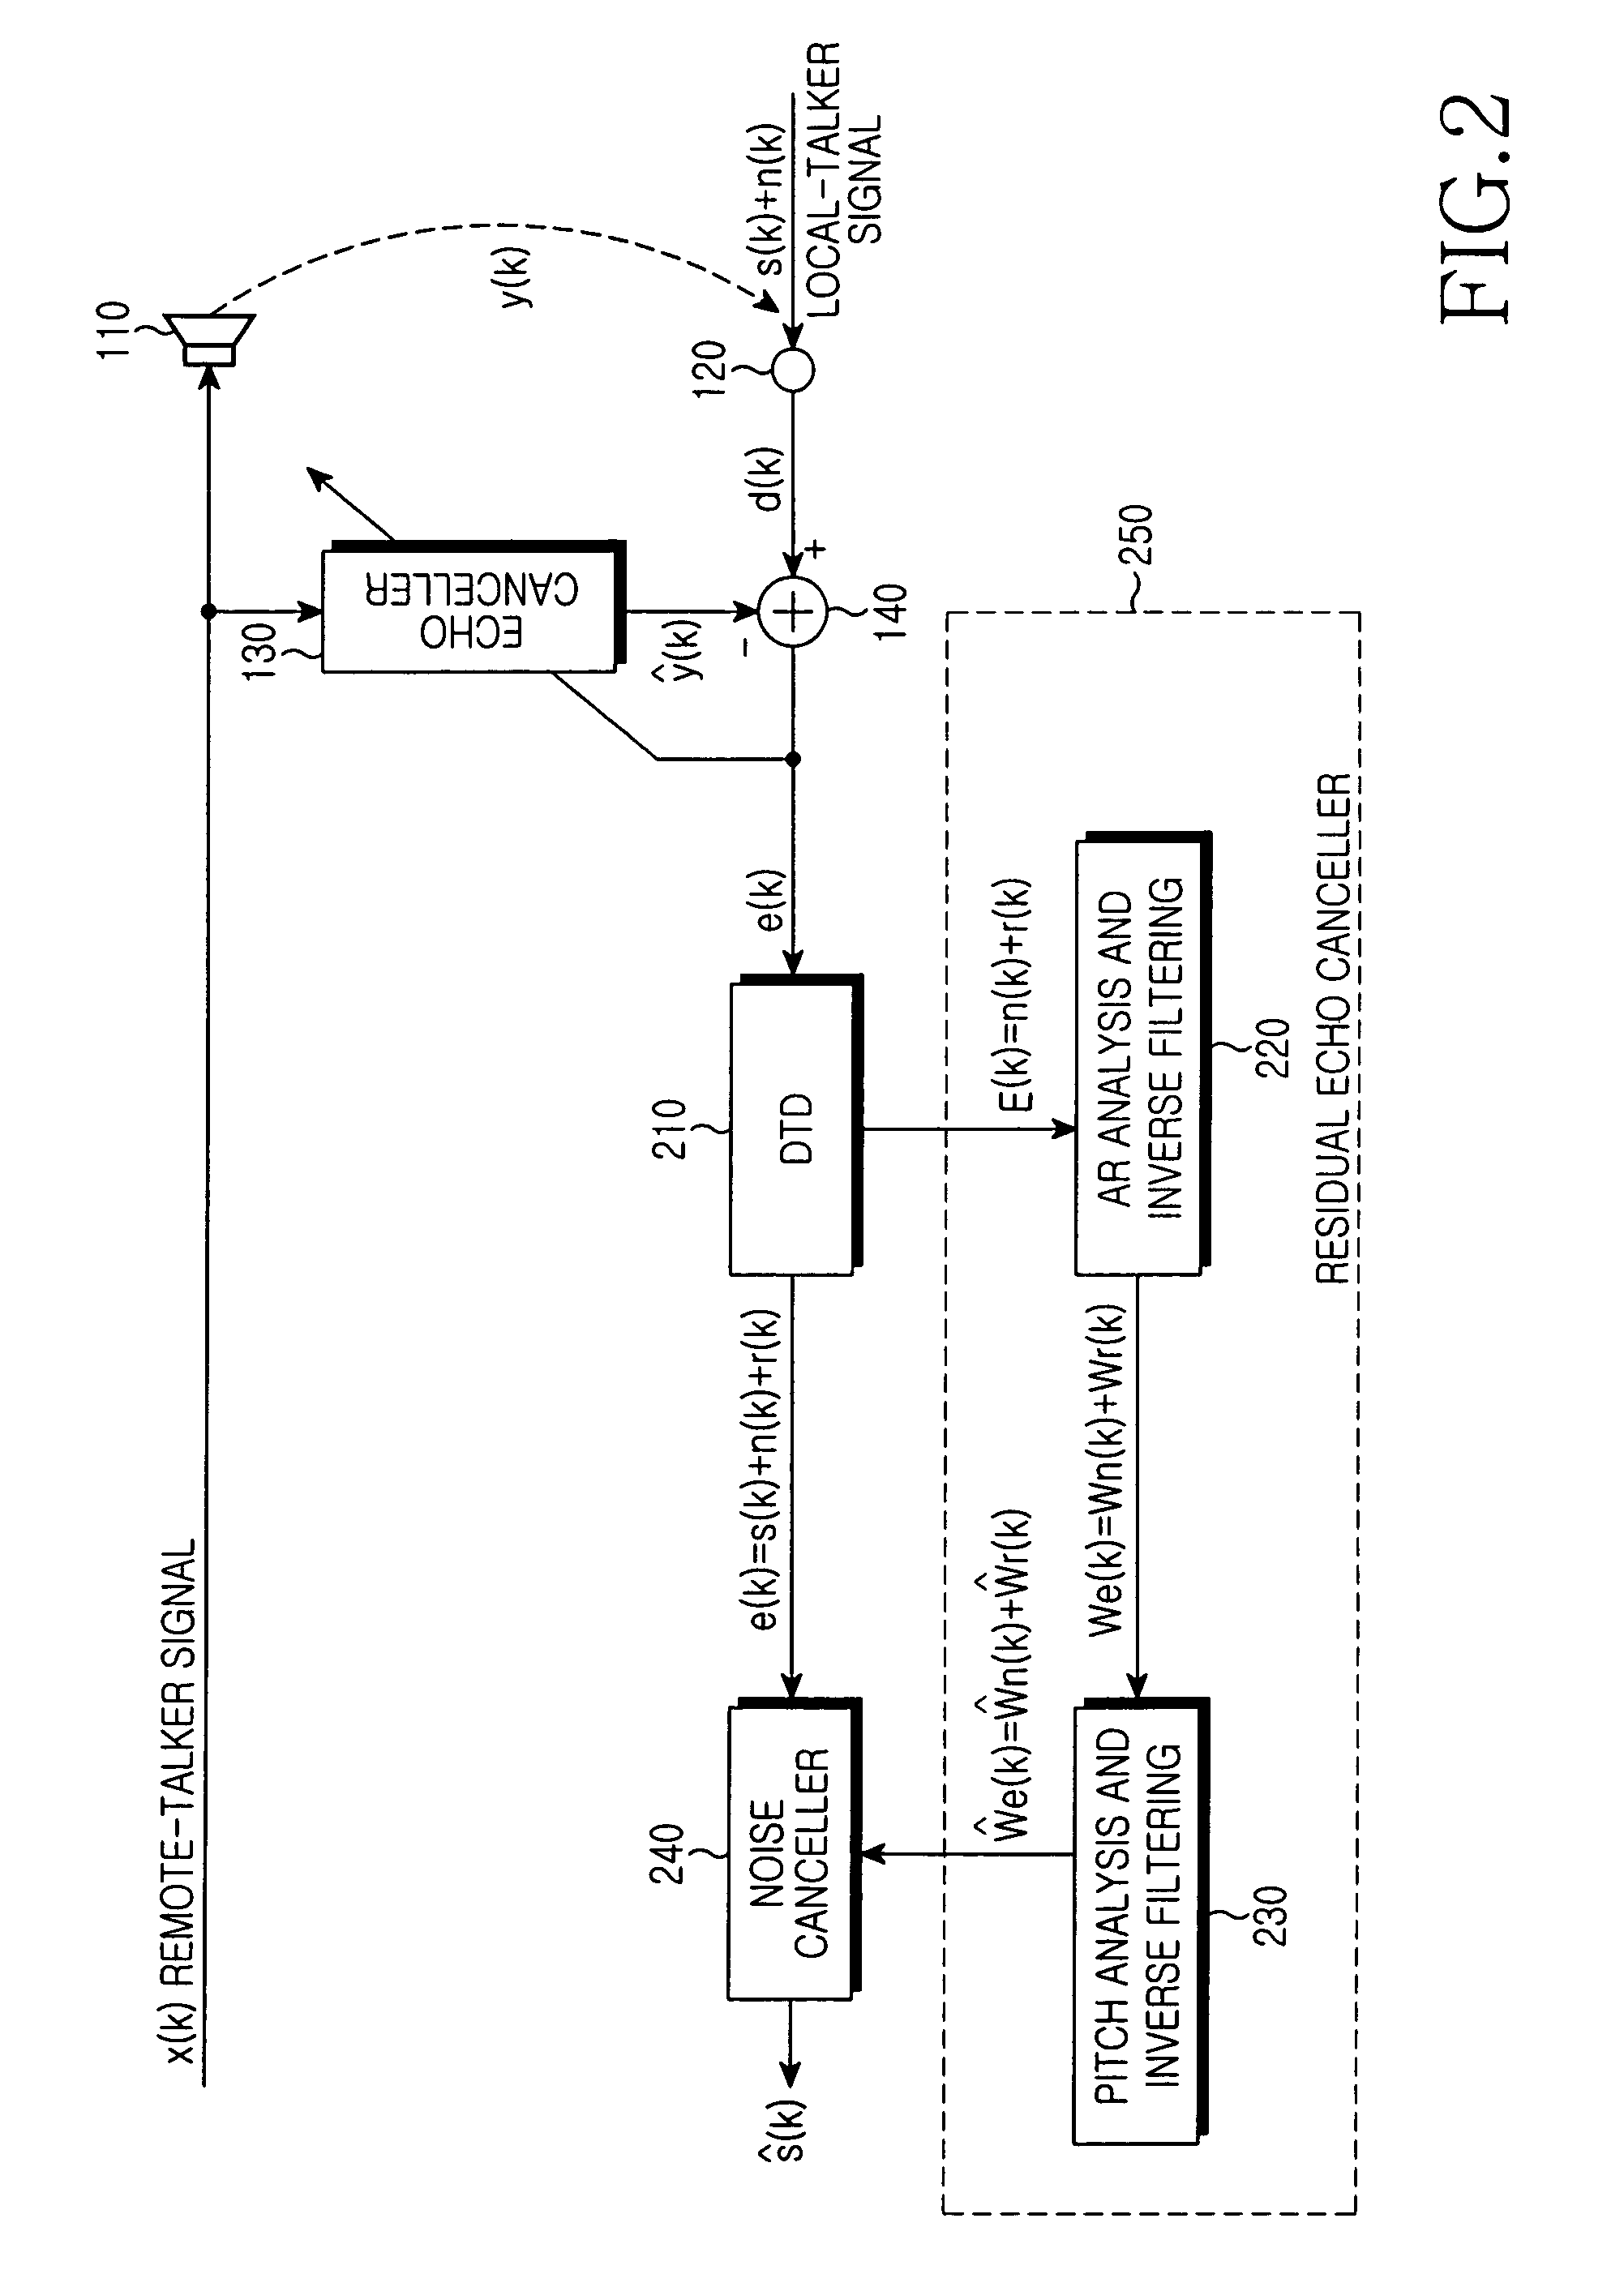 Apparatus and method for canceling residual echo in a mobile terminal of a mobile communication system